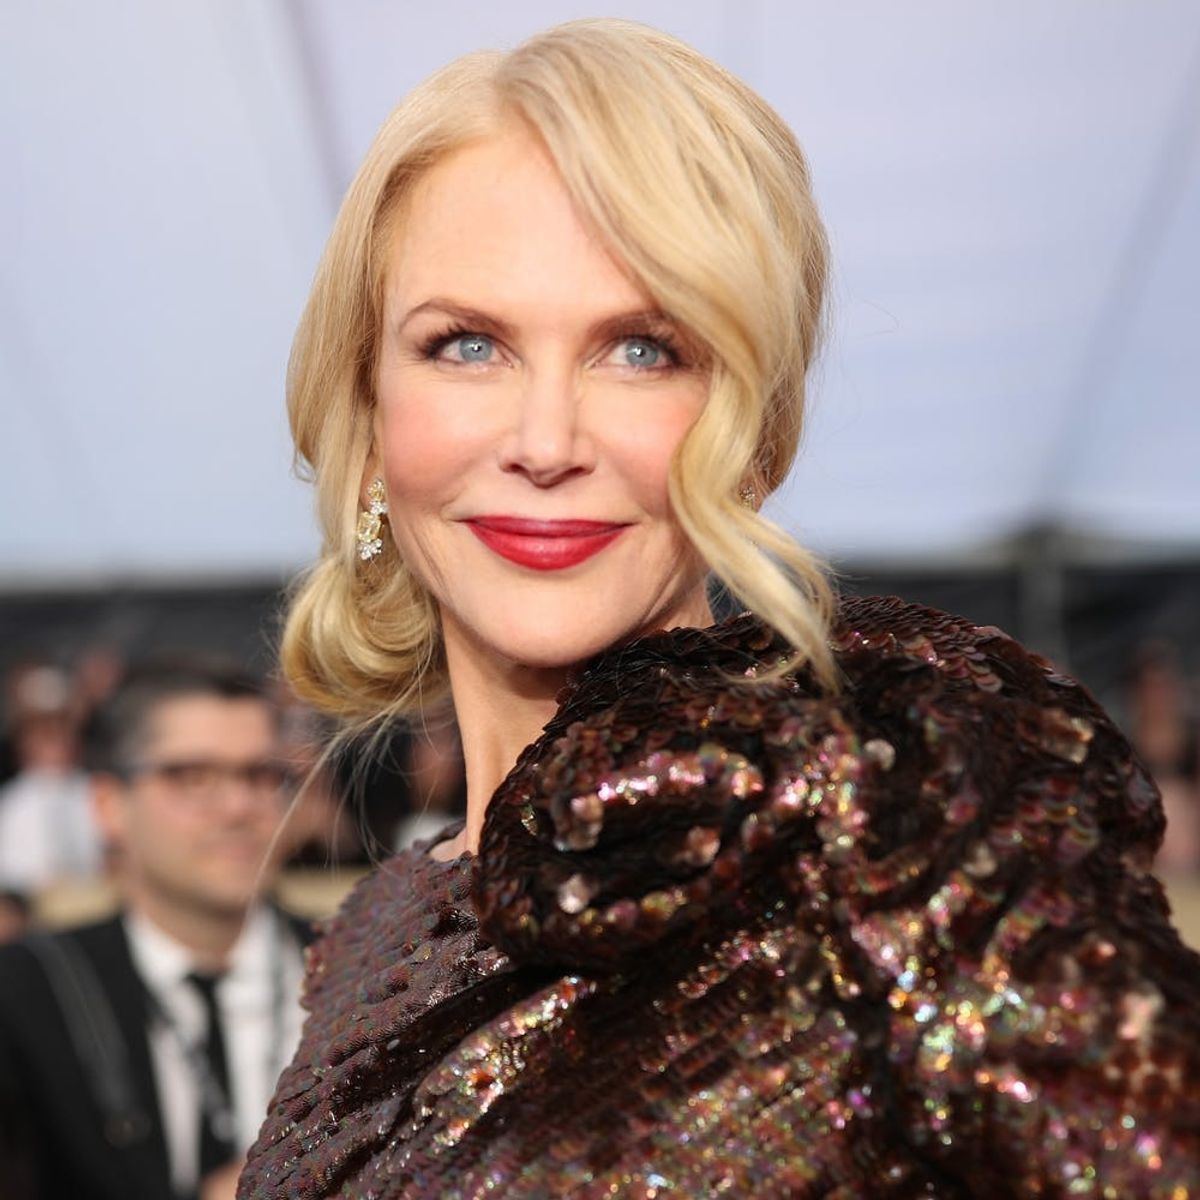 Nicole Kidman Is Adapting Another Book by ‘Big Little Lies’ Author Liane Moriarty